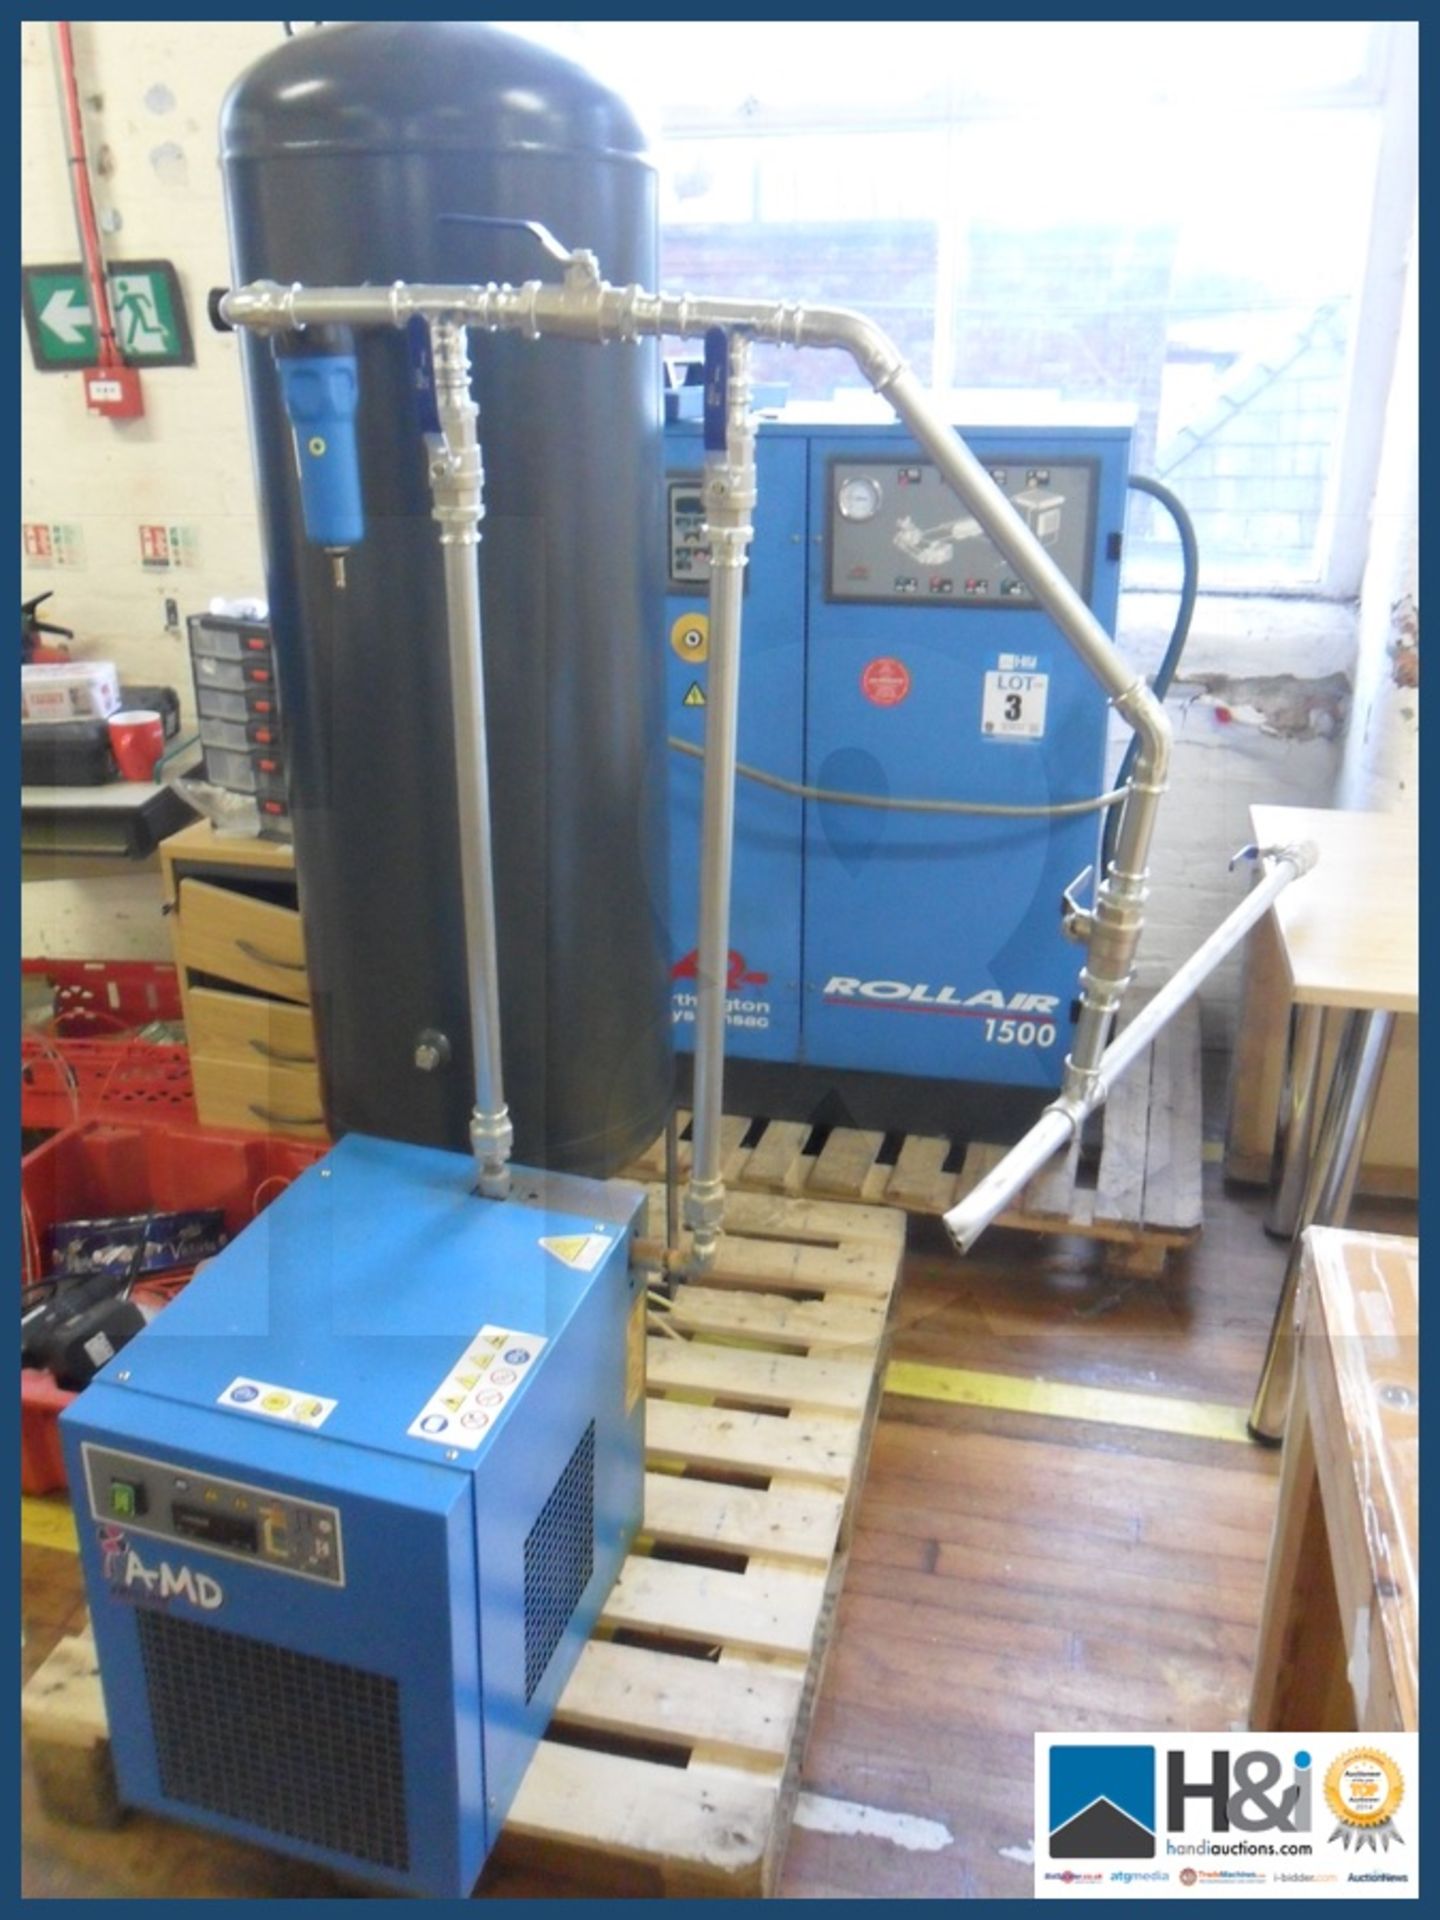 Rollair 1500 Screw compressor vertical tank. 270 ltr capacity and AMD 18/AC Condenser. See images f